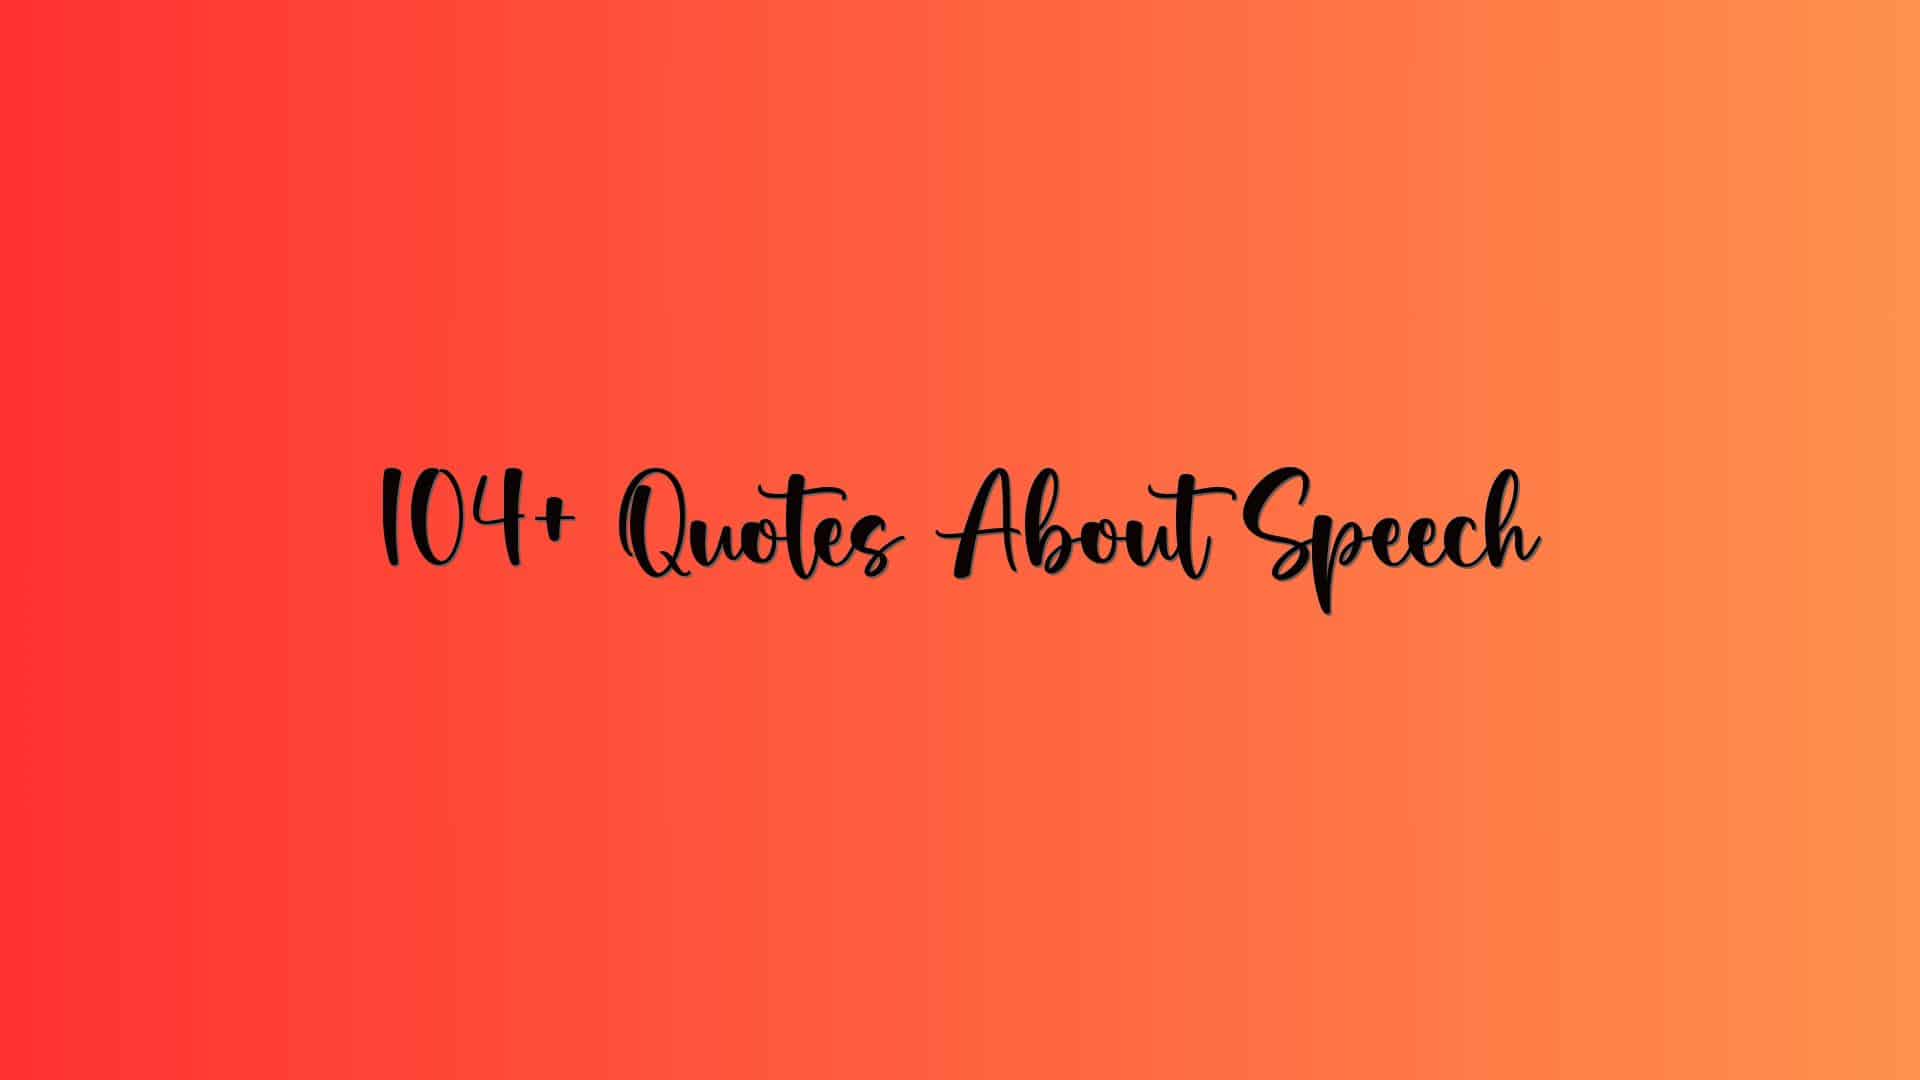 104+ Quotes About Speech